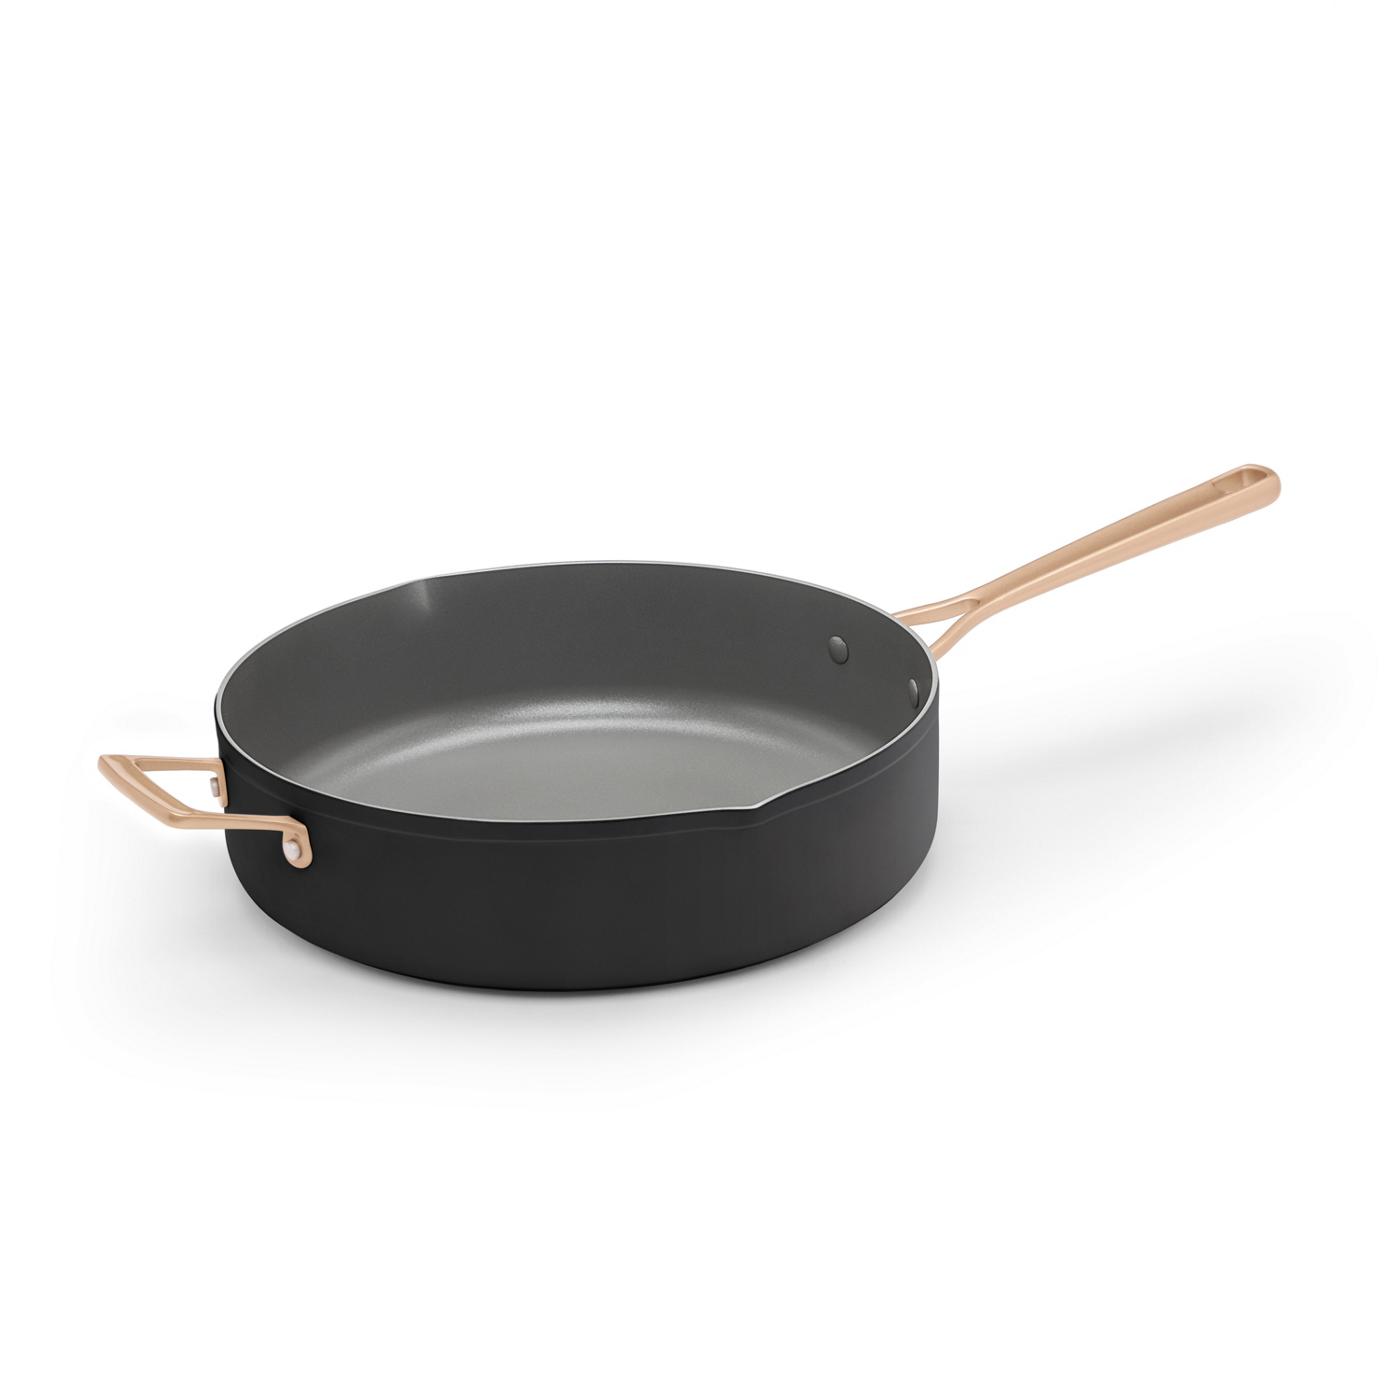 Kitchen & Table by H-E-B Non-Stick Sauté Pan with Strainer Lid - Classic Black; image 7 of 7